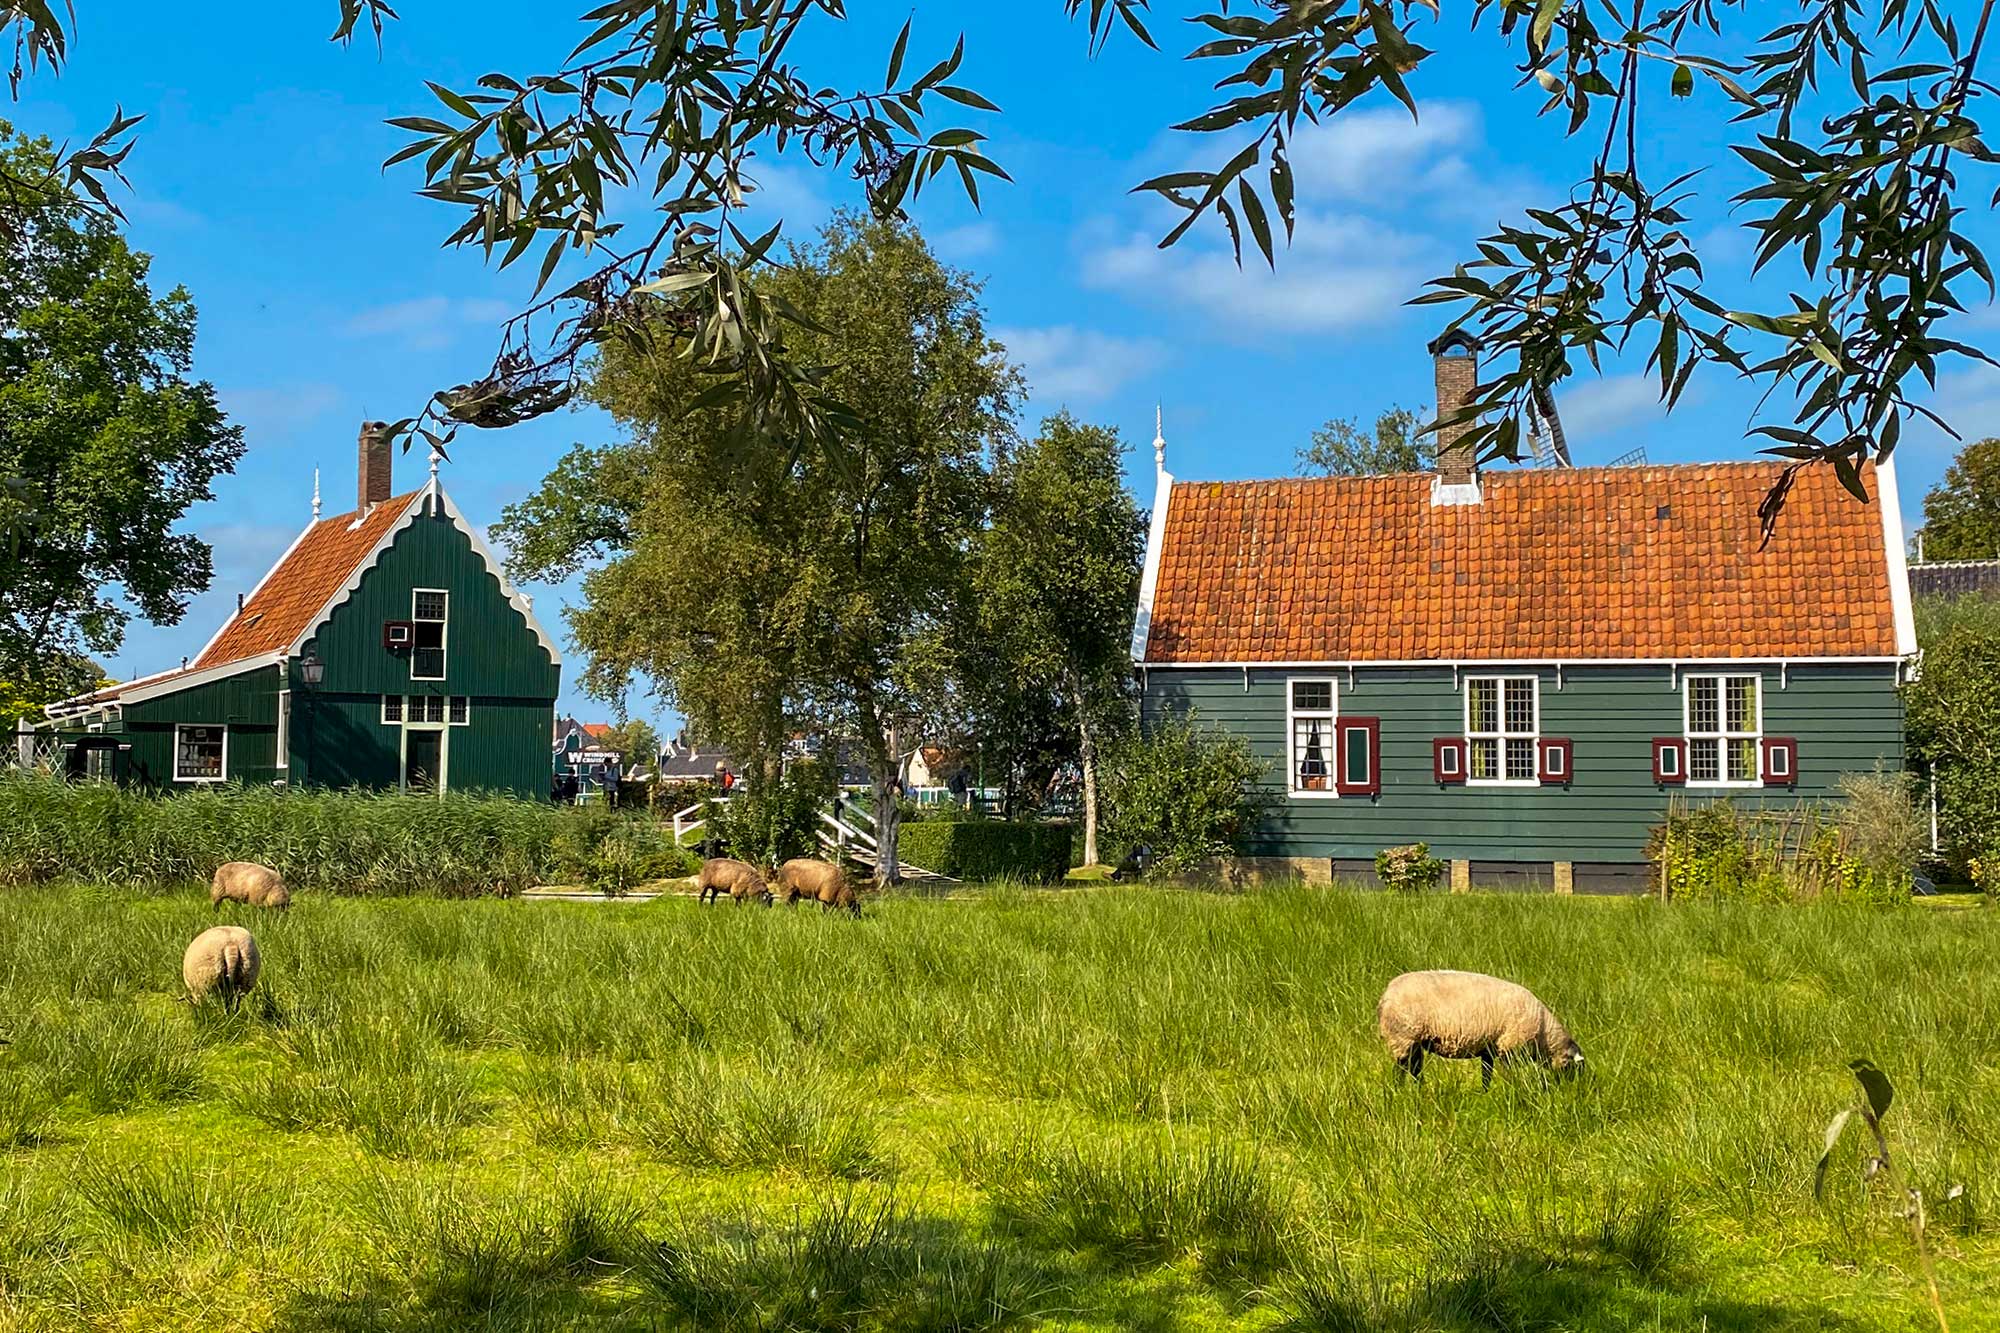 View of the houses of Zaanse Schans with sheep grazing in a grassy field on a bright blue sunny day.